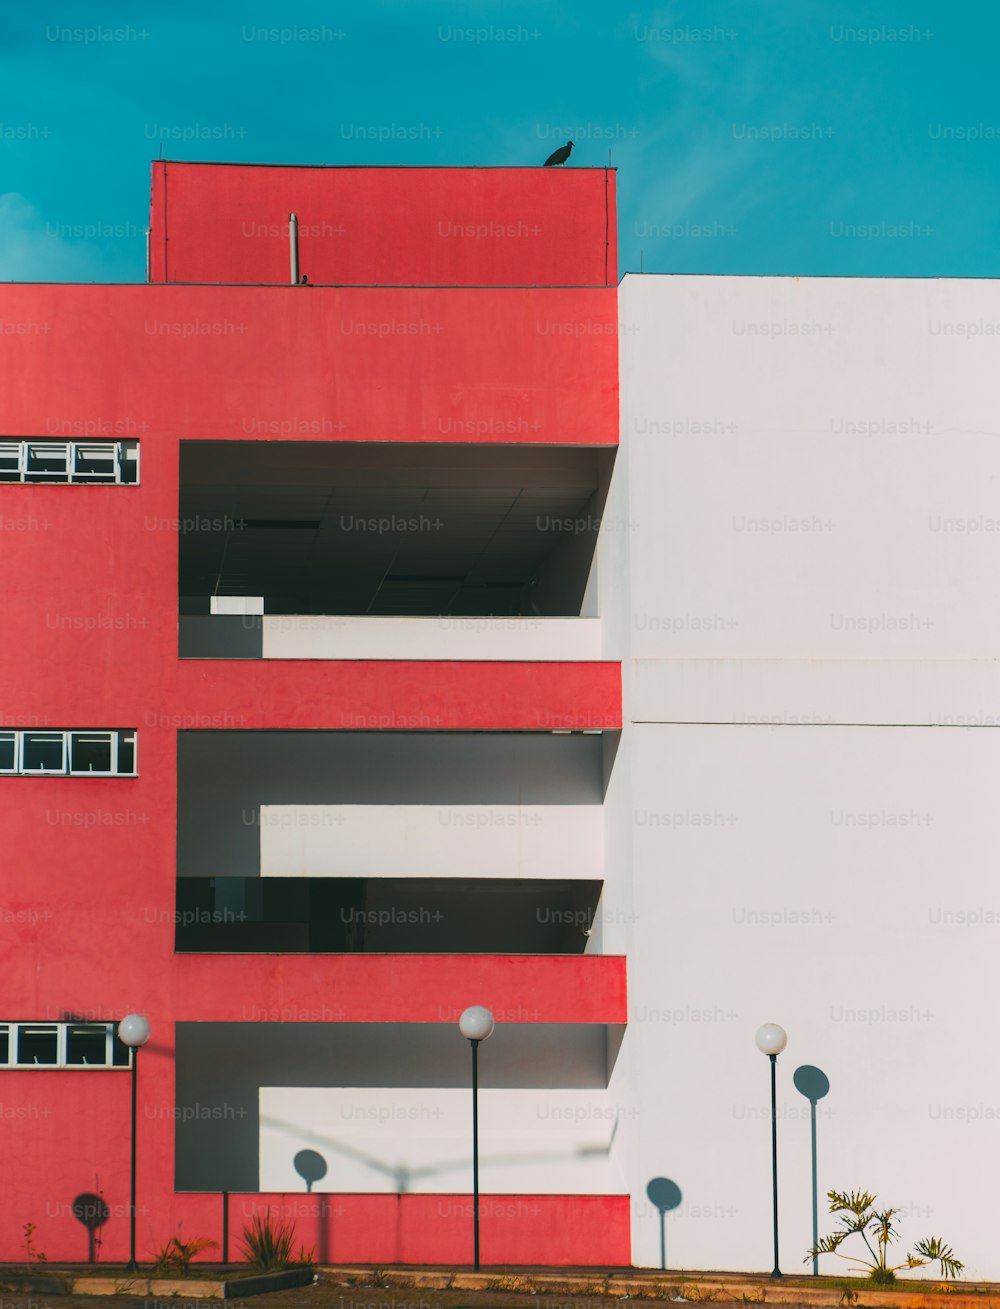 The facade of the modern building divided into two: one part of the facade is red and has balconies and windows, another part is white; lanterns below, a huge bird on the roof, minimalist geometry